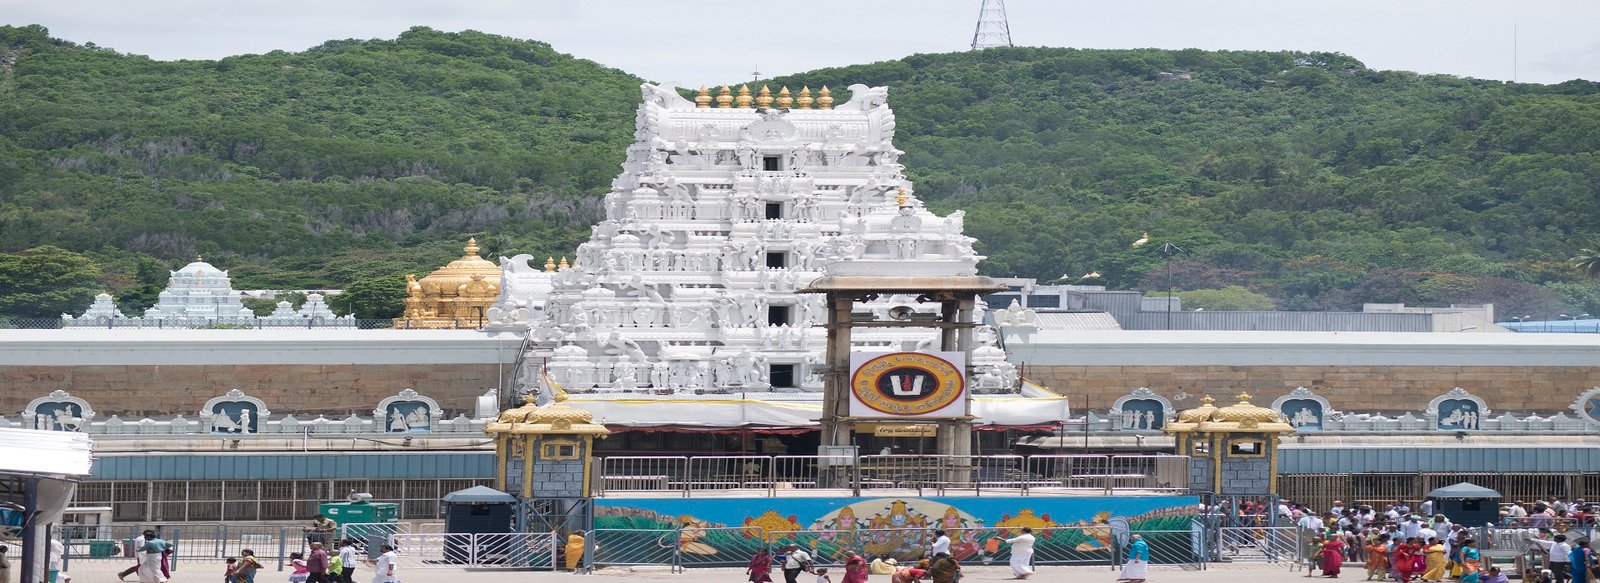 Famous Hindu Temples of South India